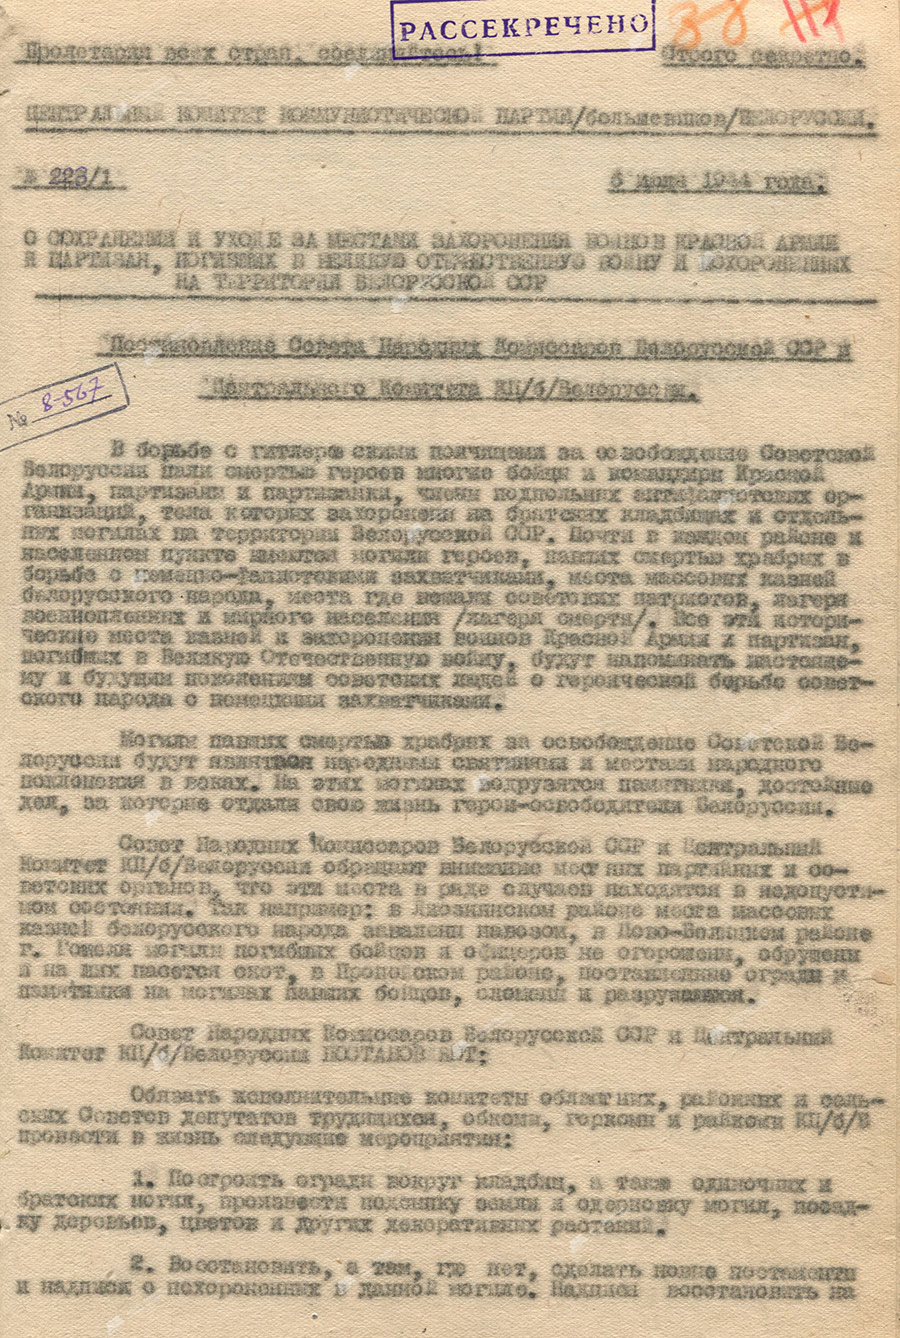 Resolution of the Council of People’s Commissars of the BSSR and the Central Committee of the Communist Party (Bolsheviks) of Belarus «On the preservation and care of the burial sites of Red Army soldiers and partisans who died in the Great Patriotic War and were buried on the territory of the BSSR»-с. 0